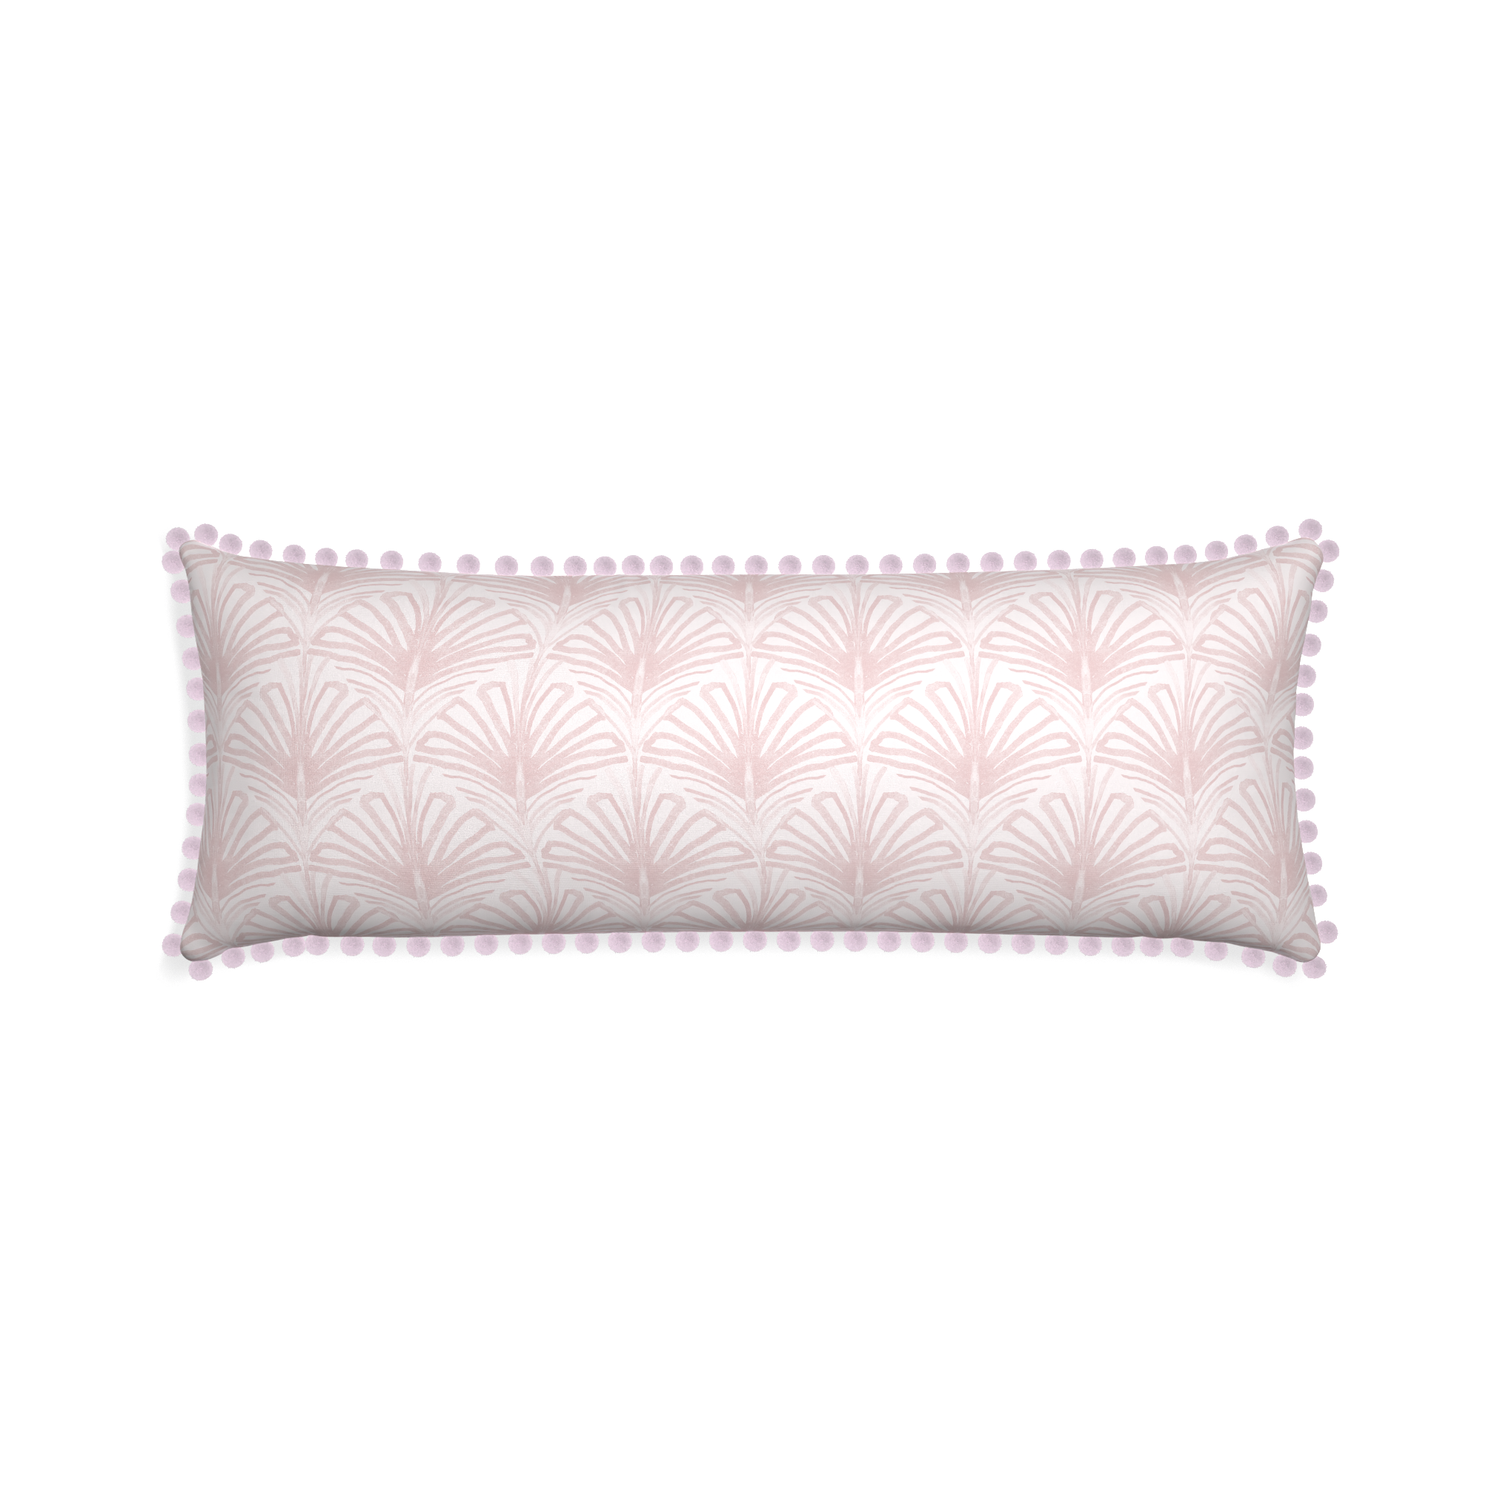 Xl-lumbar suzy rose custom pillow with l on white background